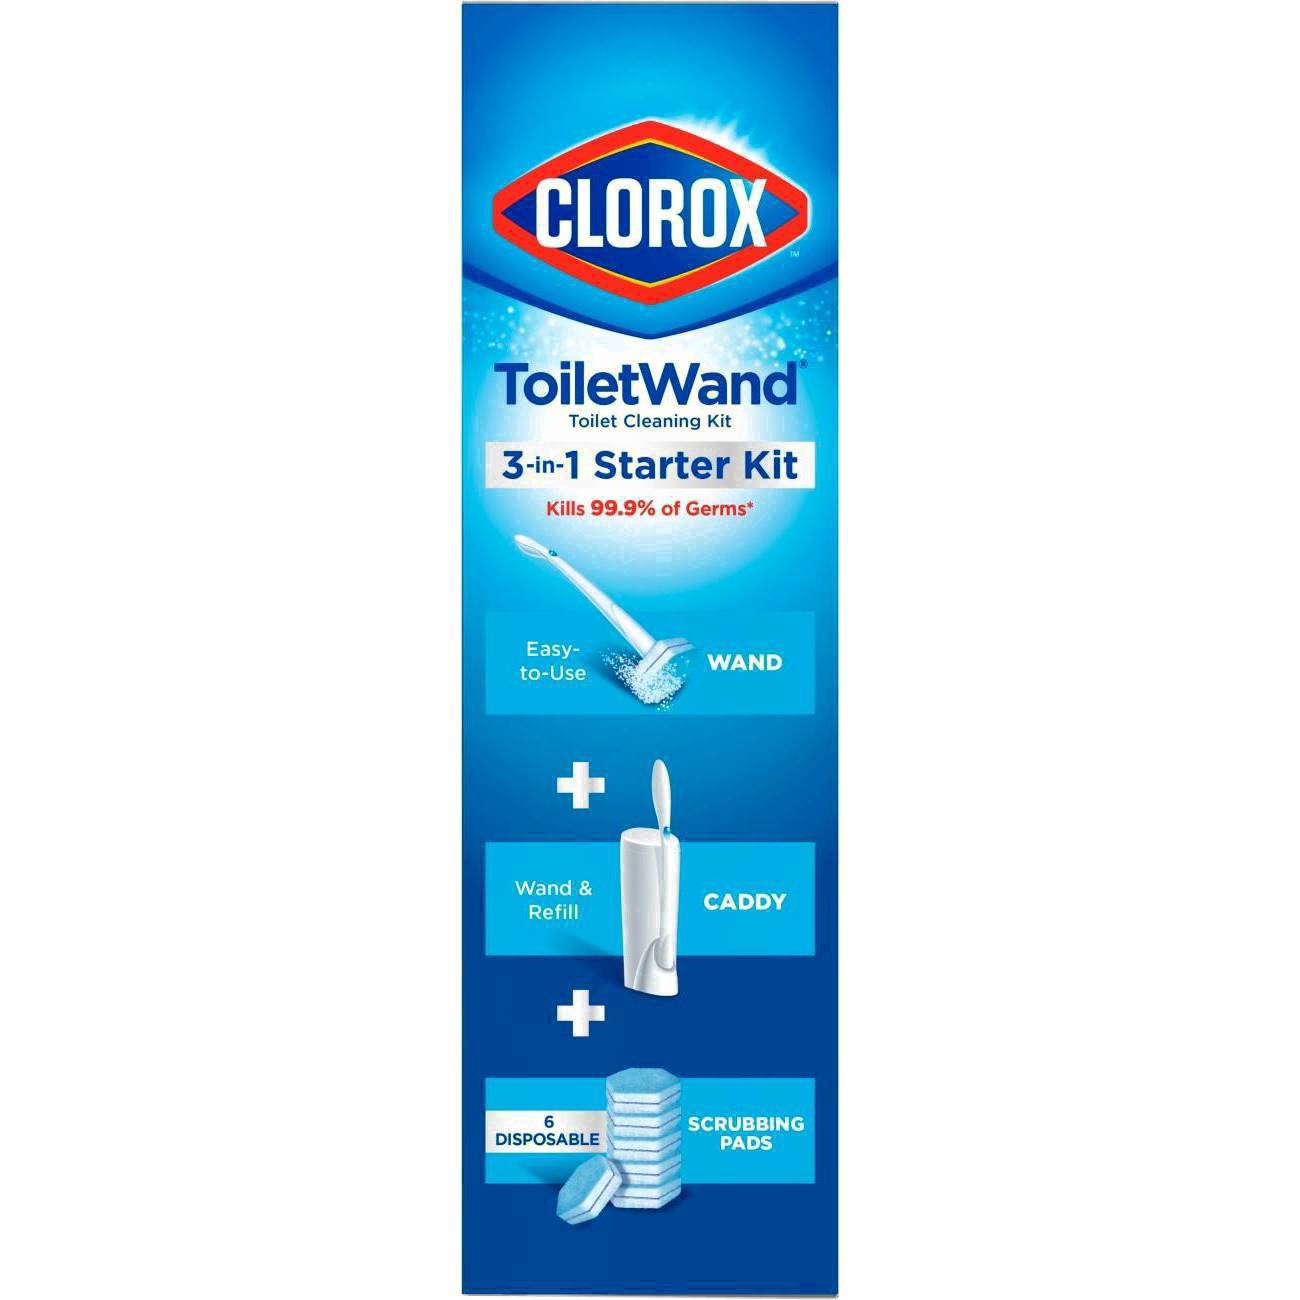 slide 99 of 176, Clorox Toilet Wand 3-in-1 Starter Toliet Cleaning Kit, 1 ct